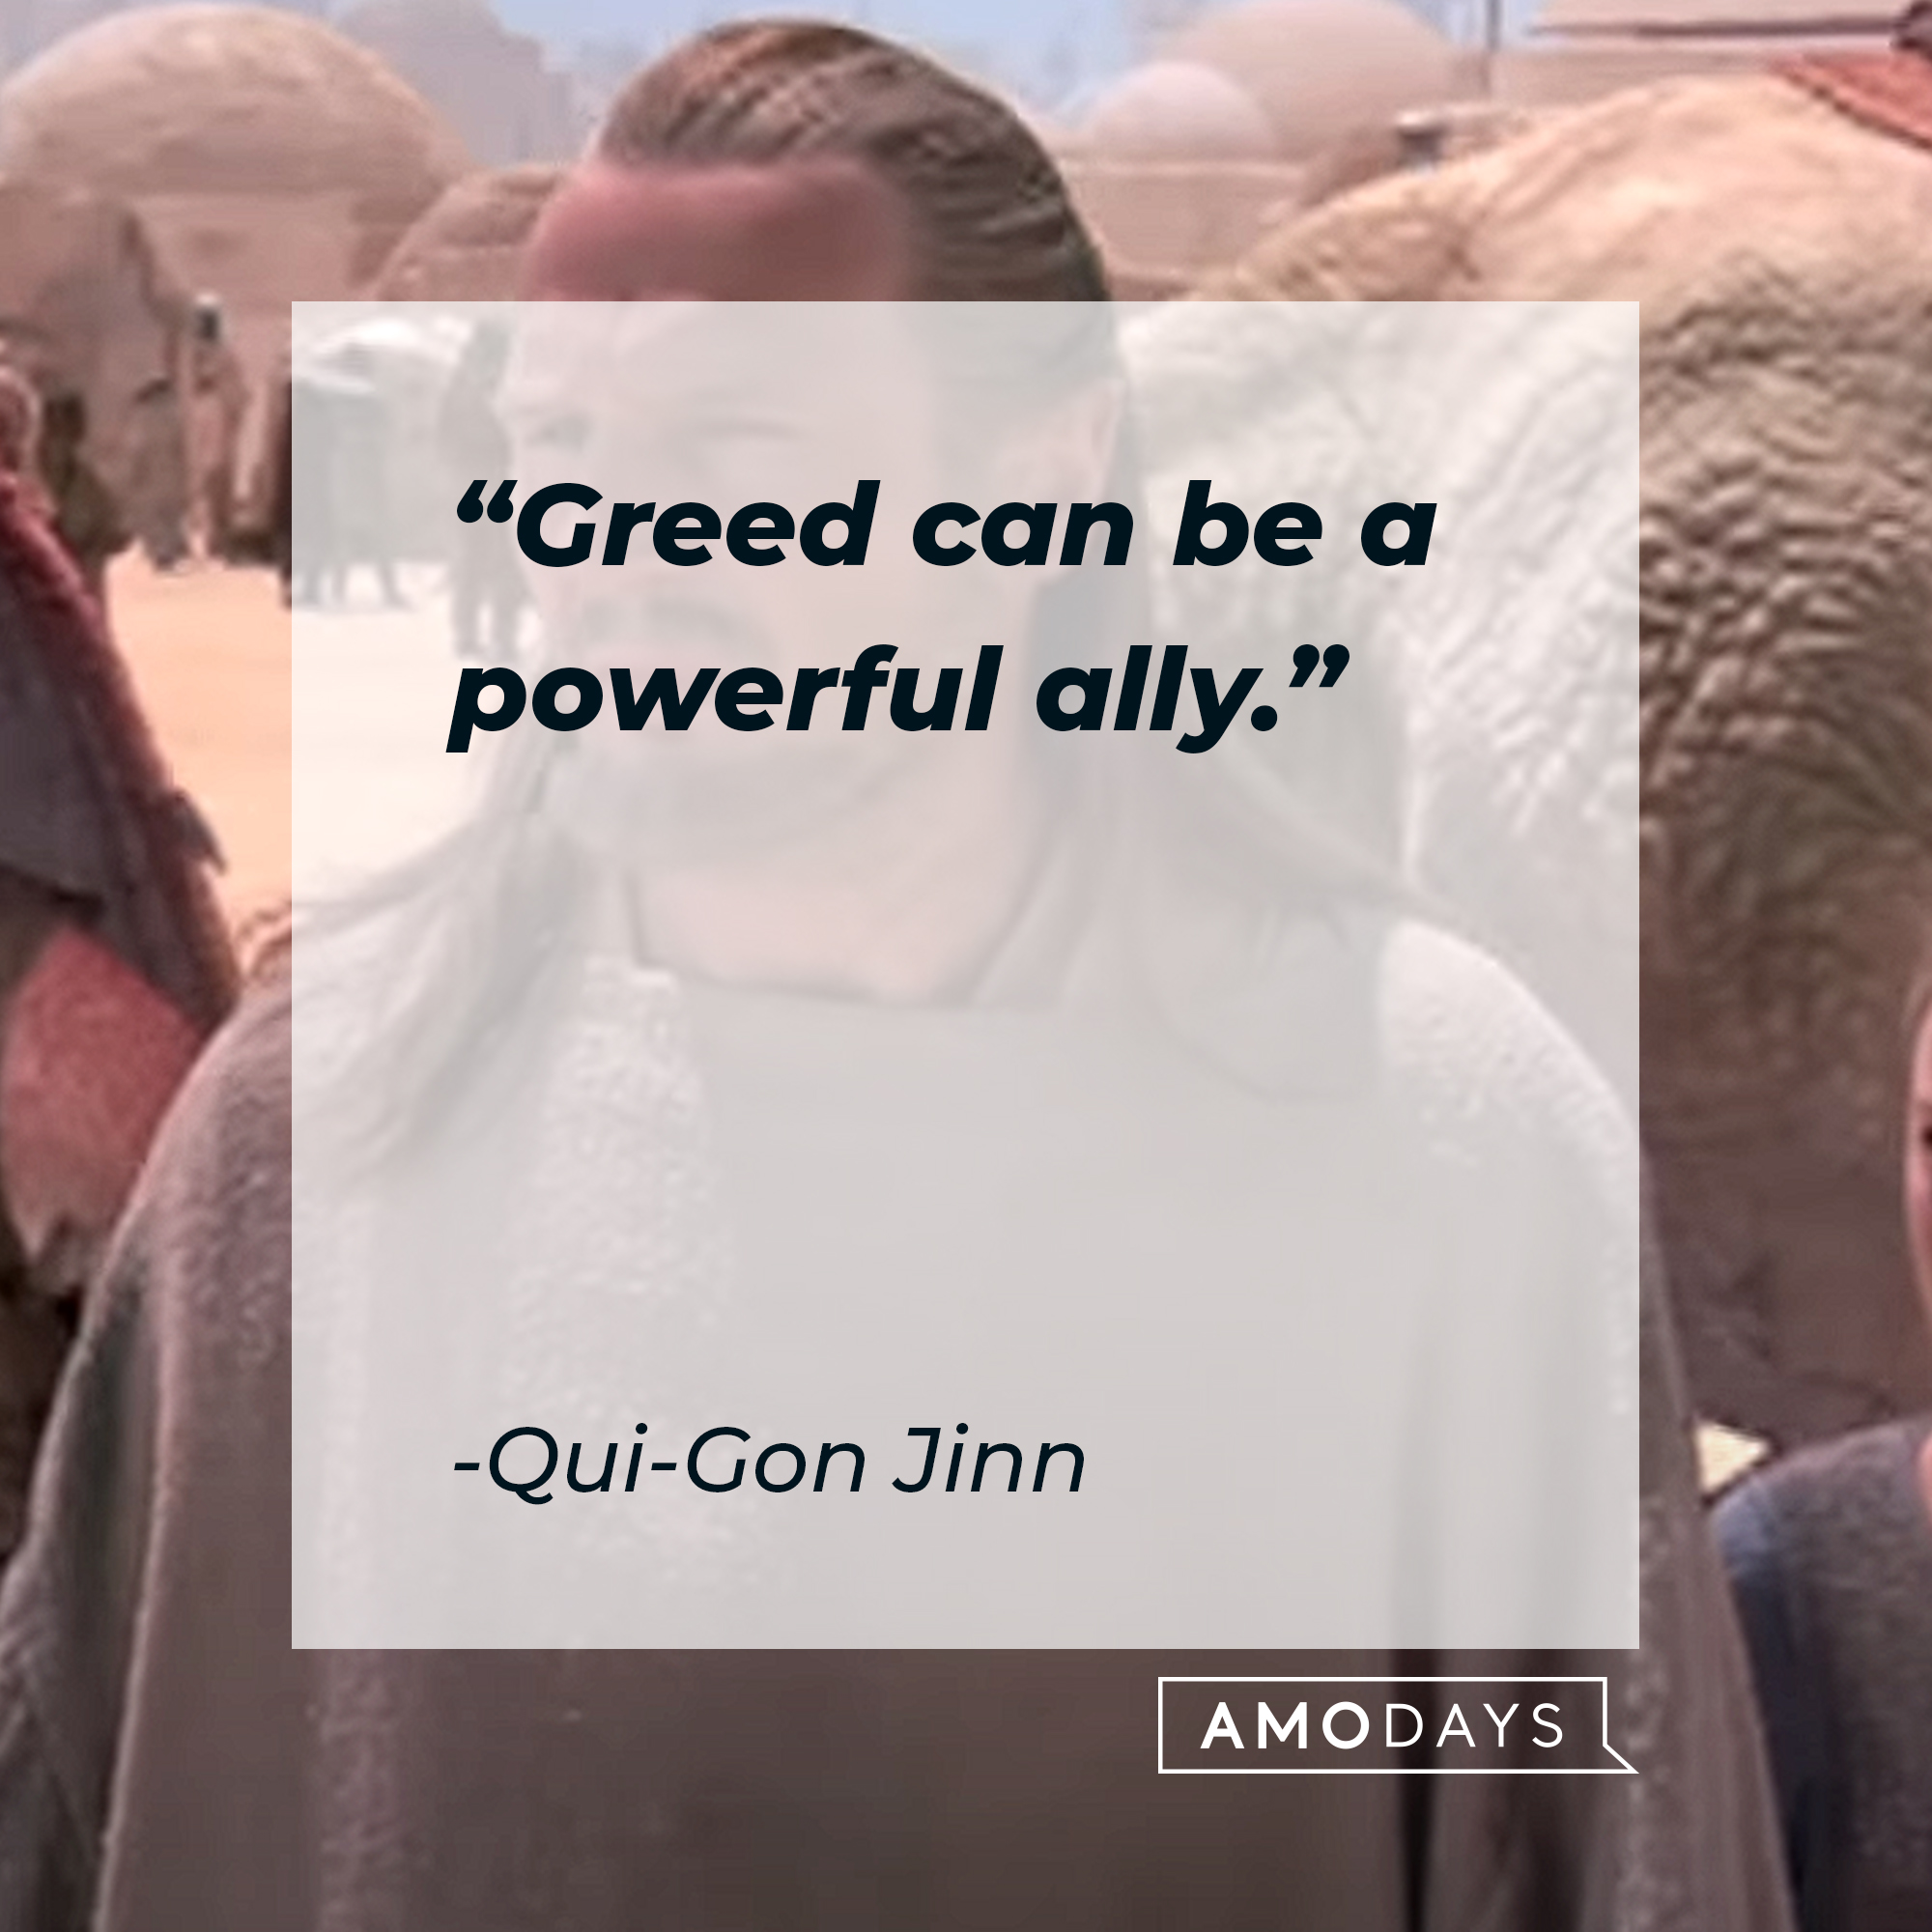 Qui-Gon Jinn with his quote: "Greed can be a powerful ally." | Source: Youtube/StarWars